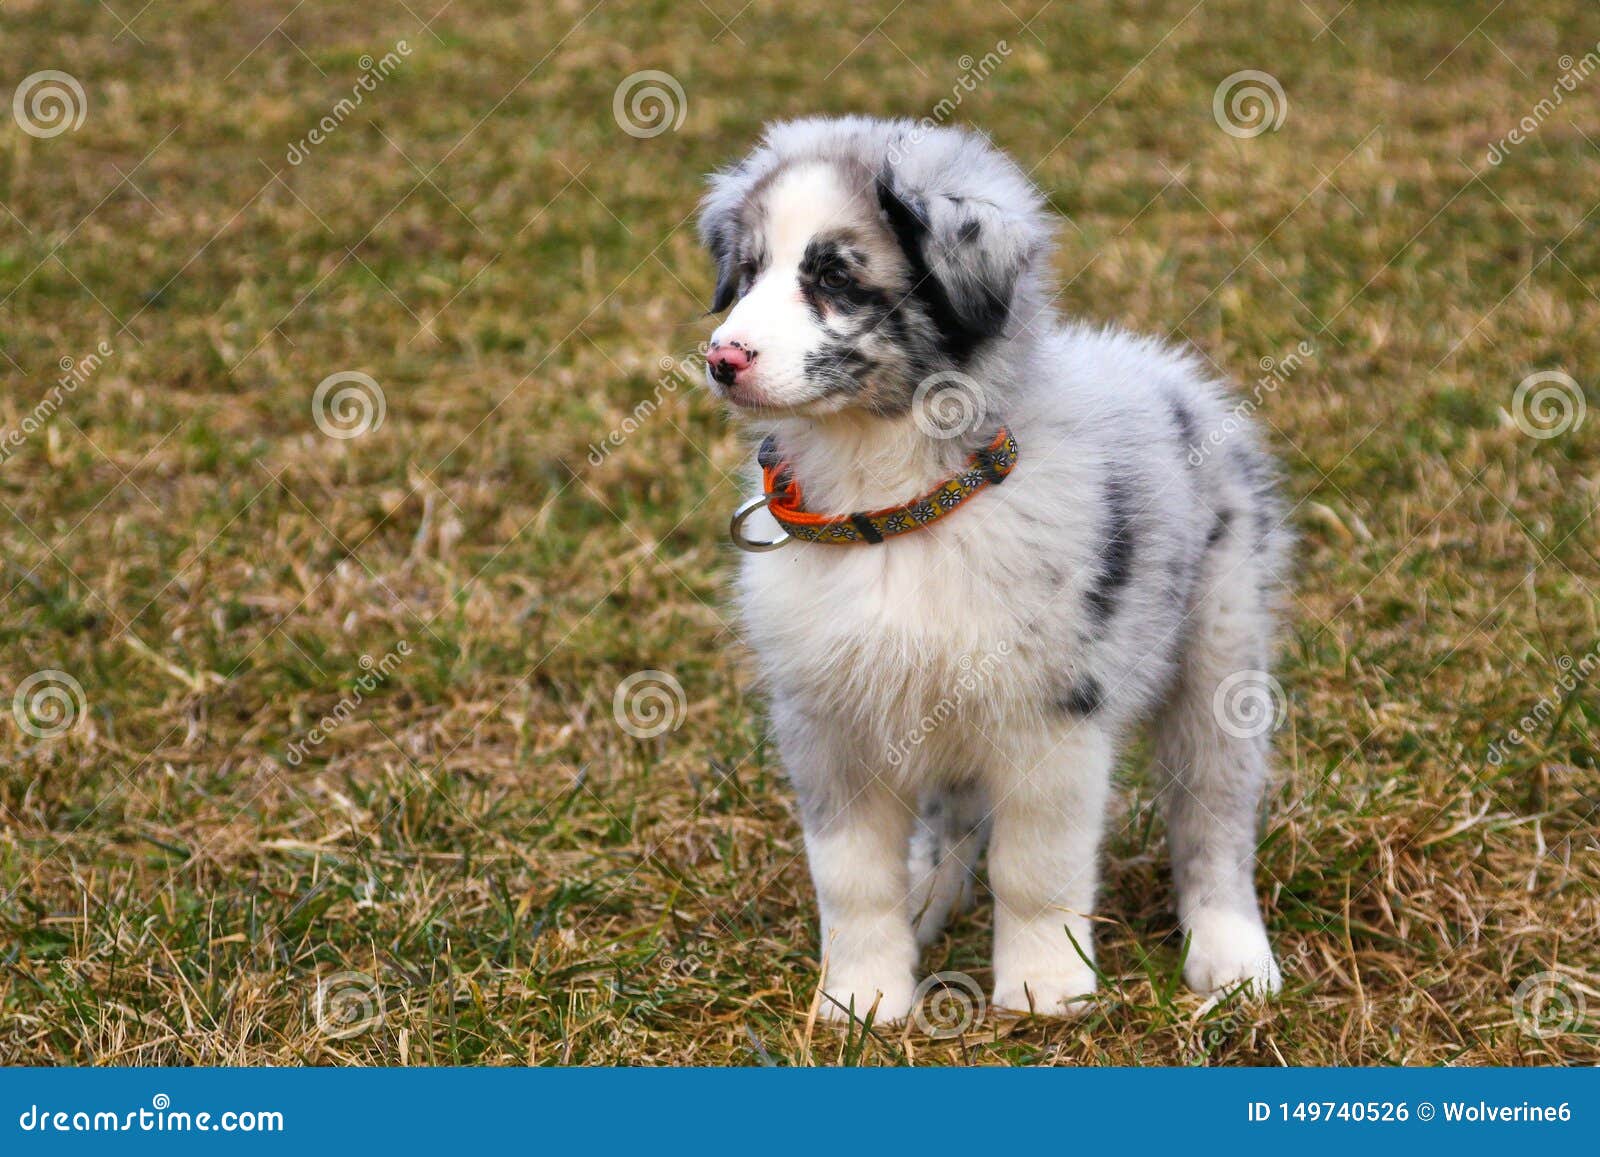 The Cute Young Puppy of the Australian Shepherd Stock Photo - Image of ...